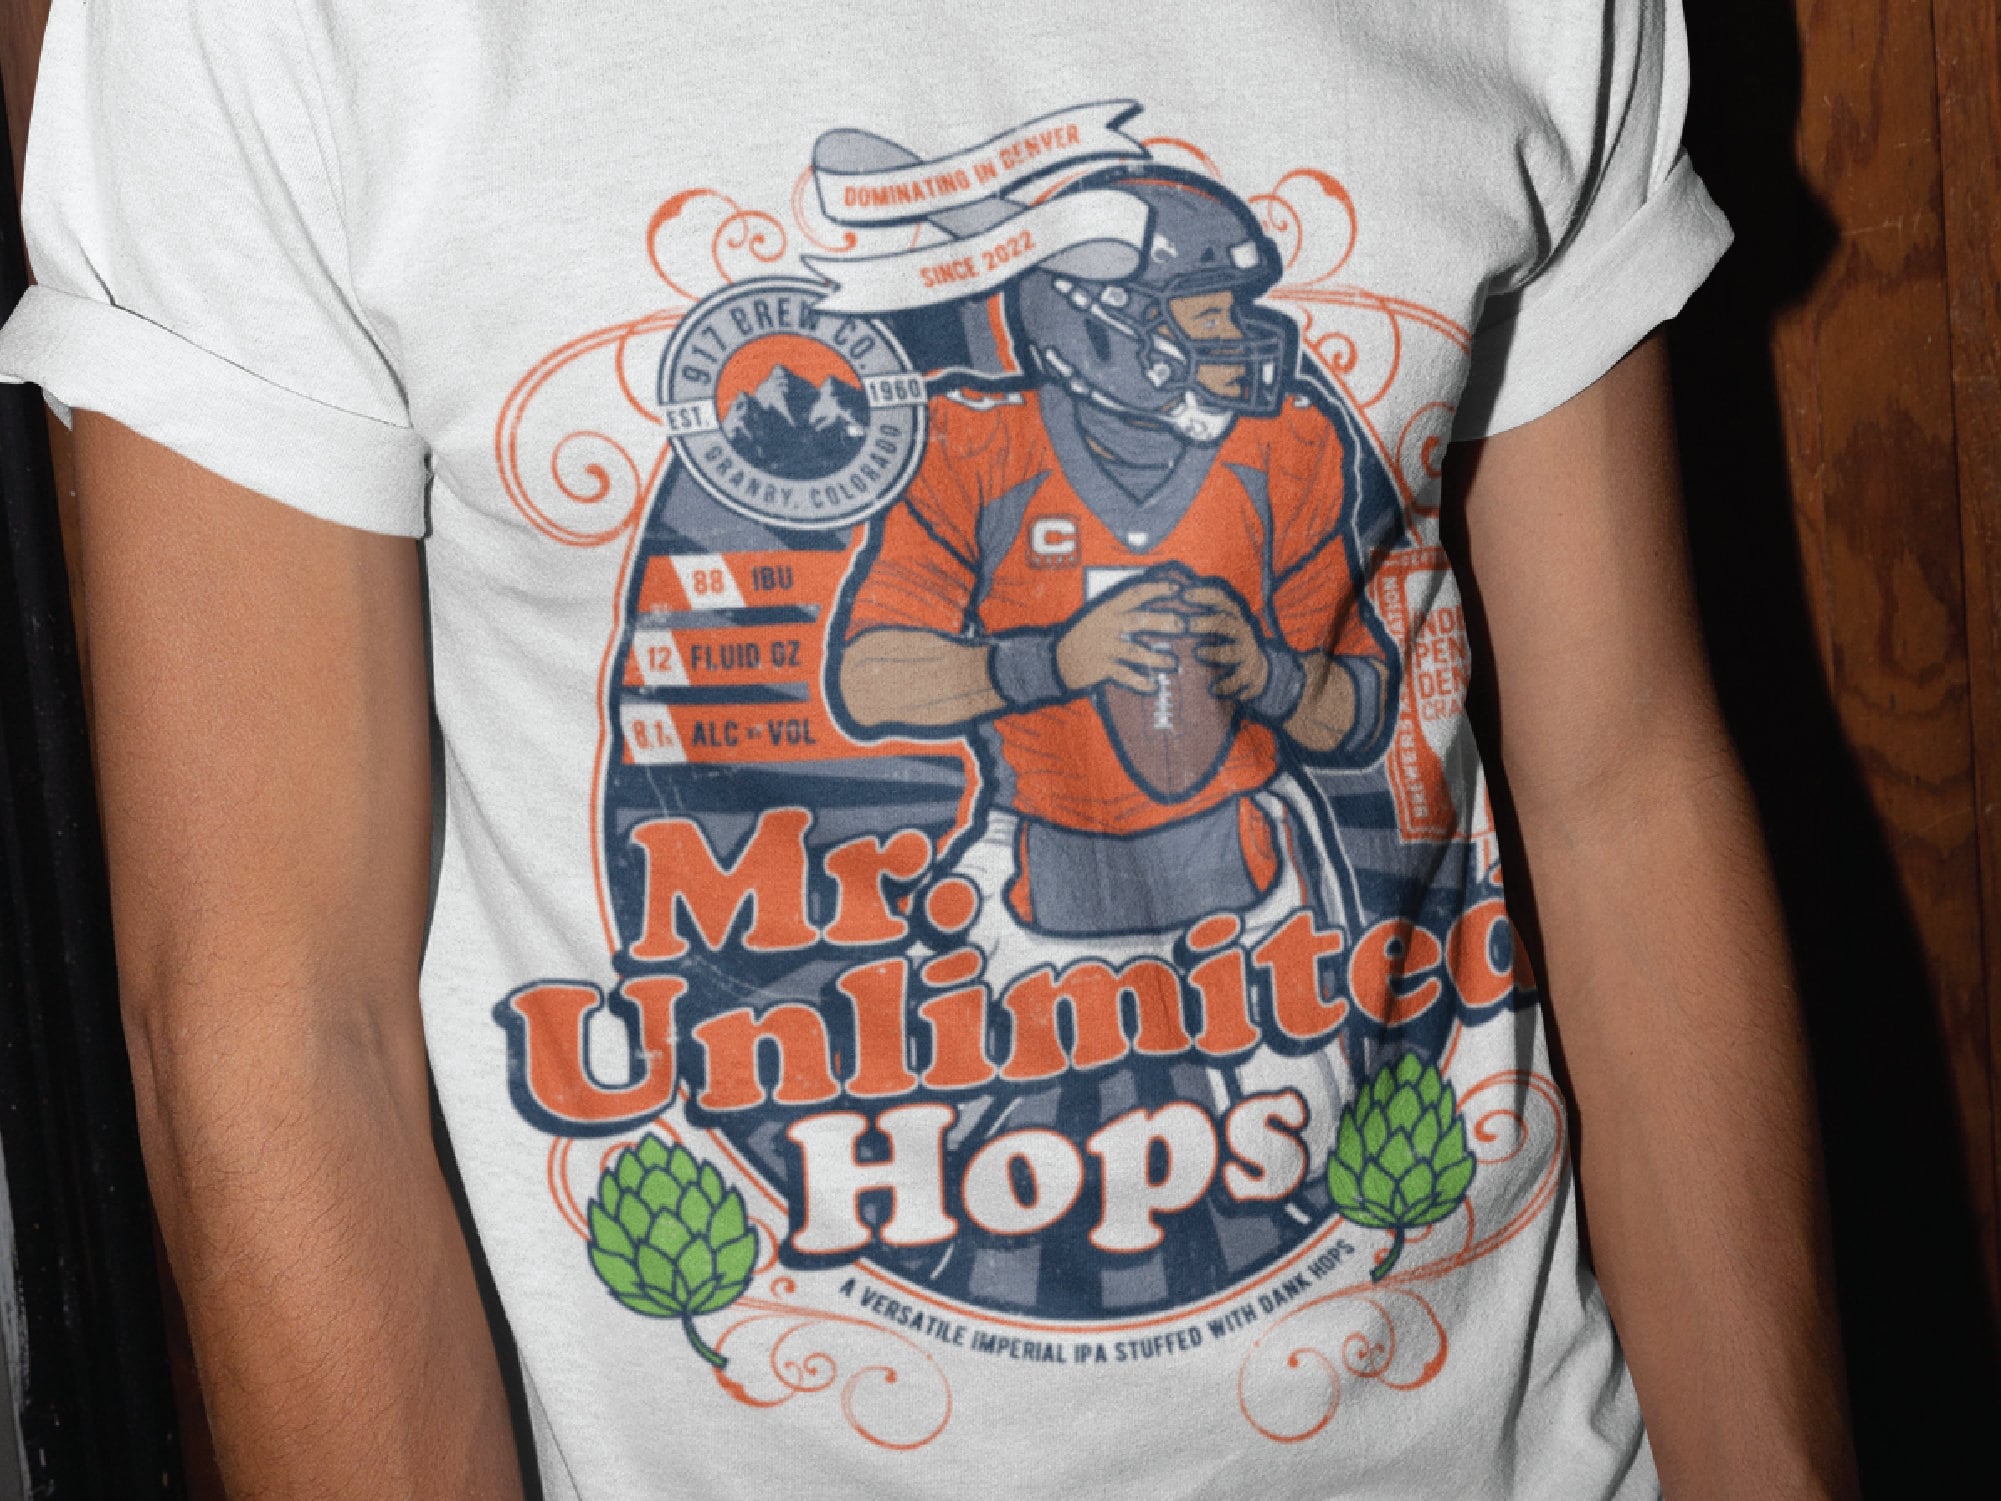 Russell Wilson broncos Fake Craft Beer Label T-shirt 